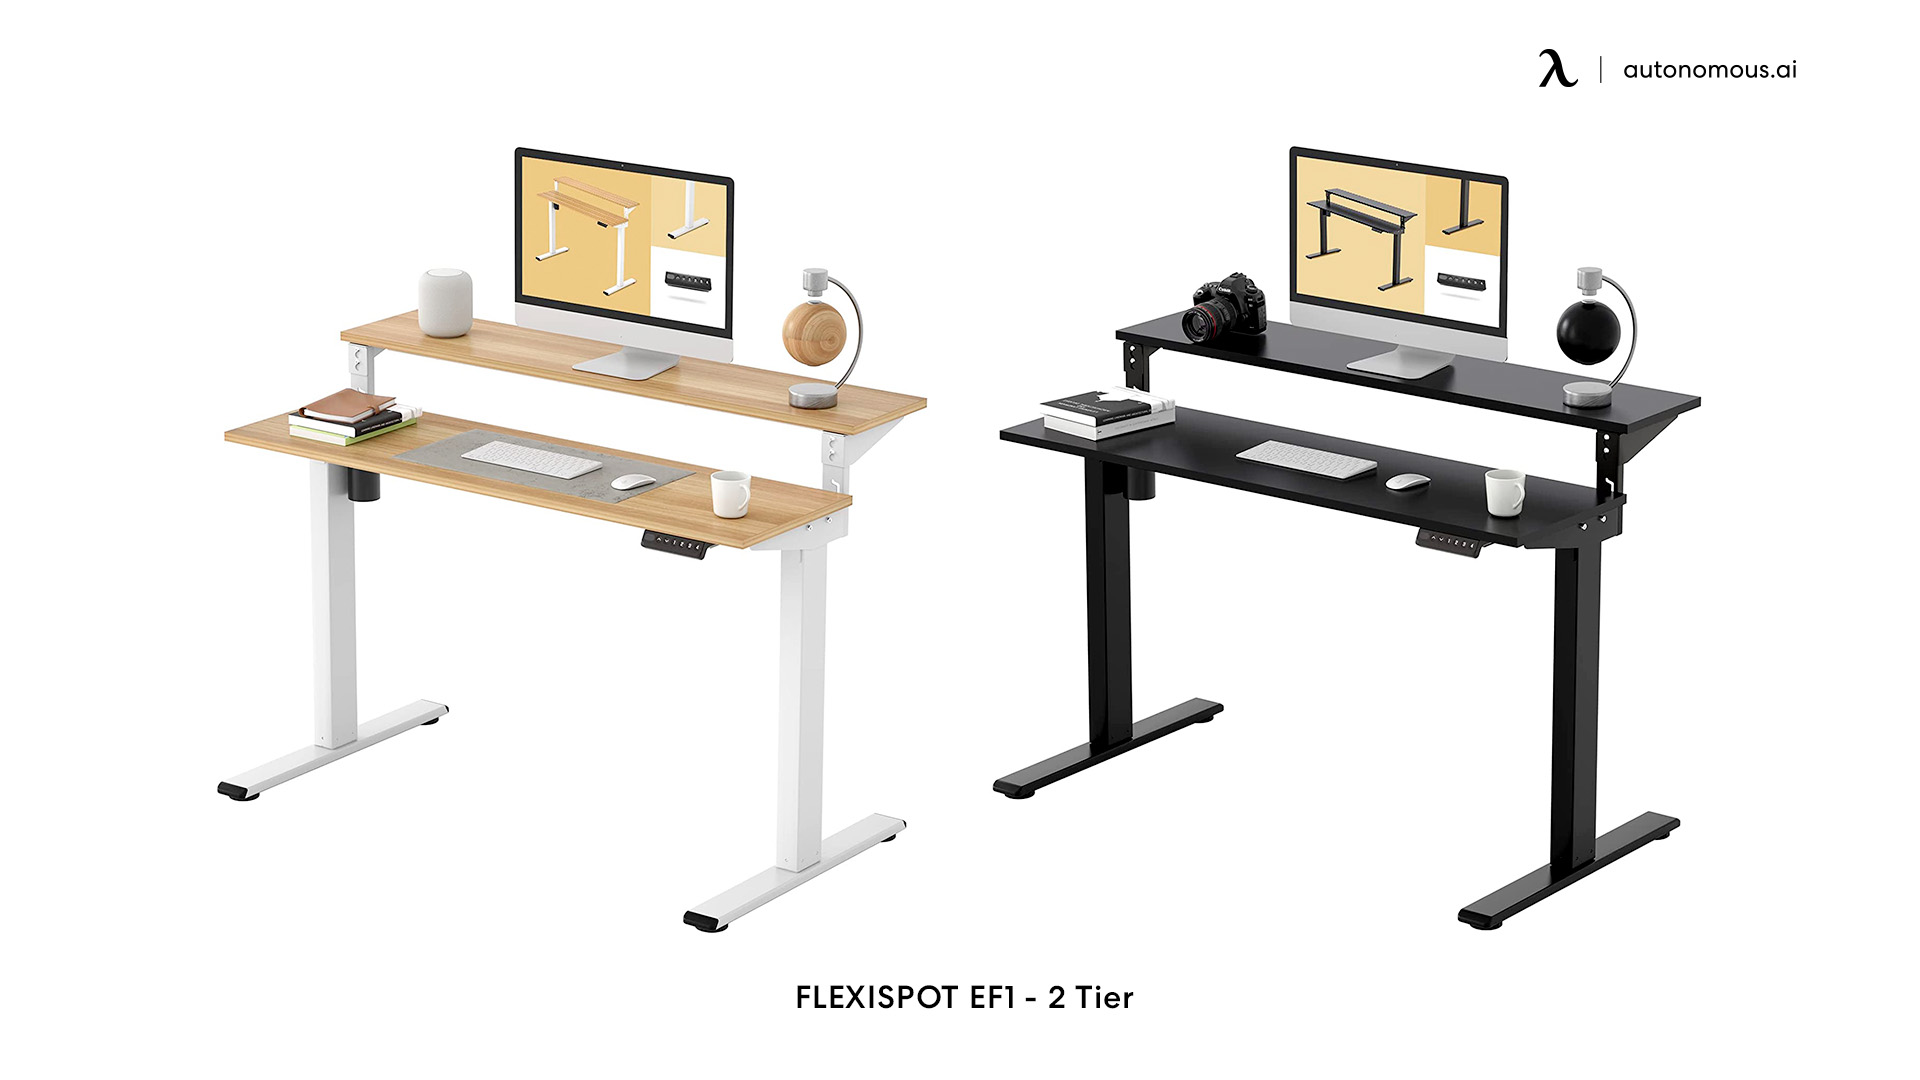 48x24 Inches 2 Tier Standing Desk from FLEXISPOT